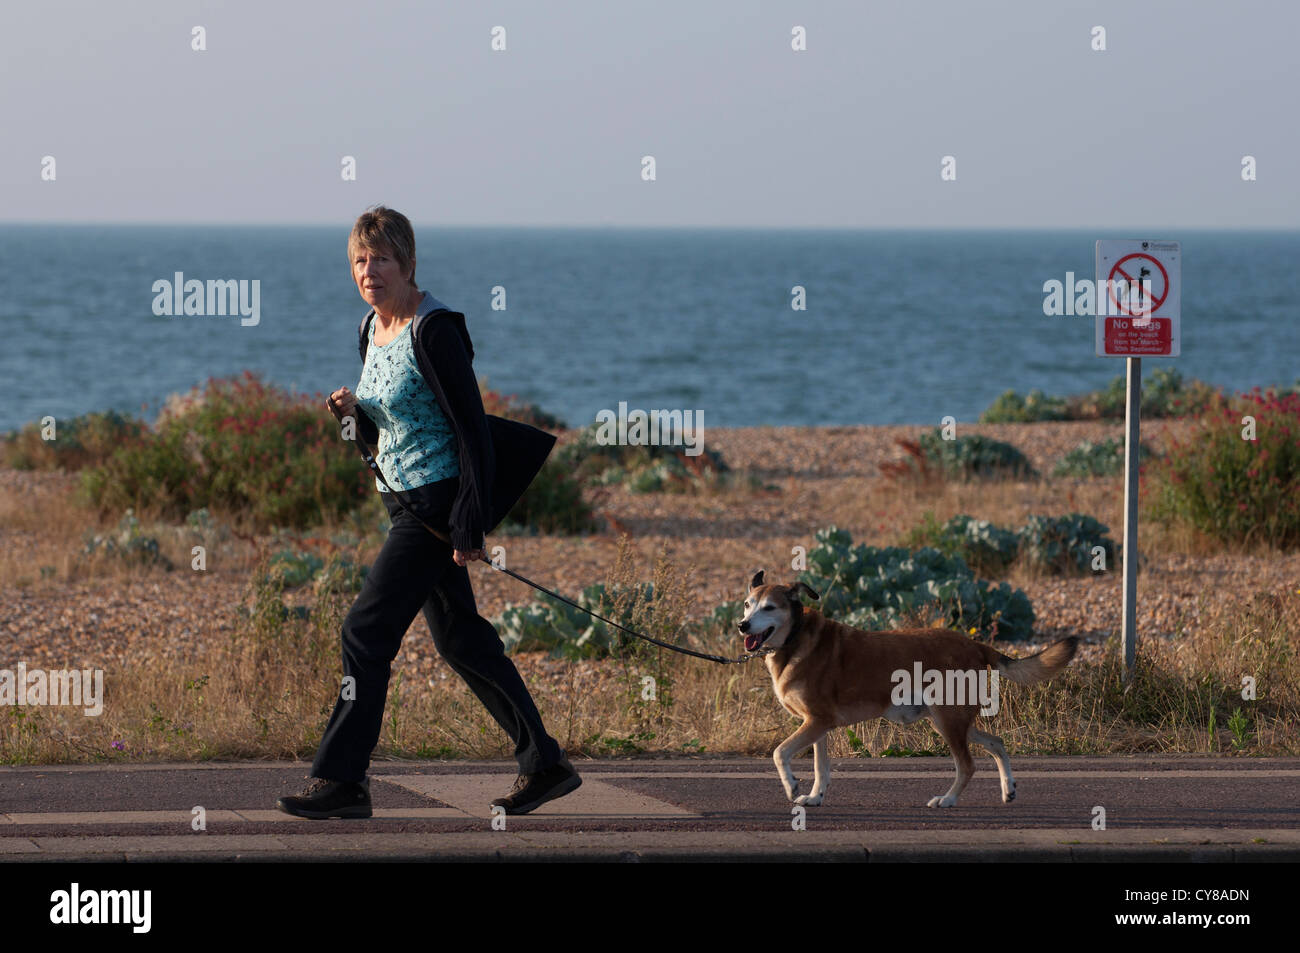 A model released image of a dog walker. Image taken at Southsea, Portsmouth on 11 th August 2012 Stock Photo